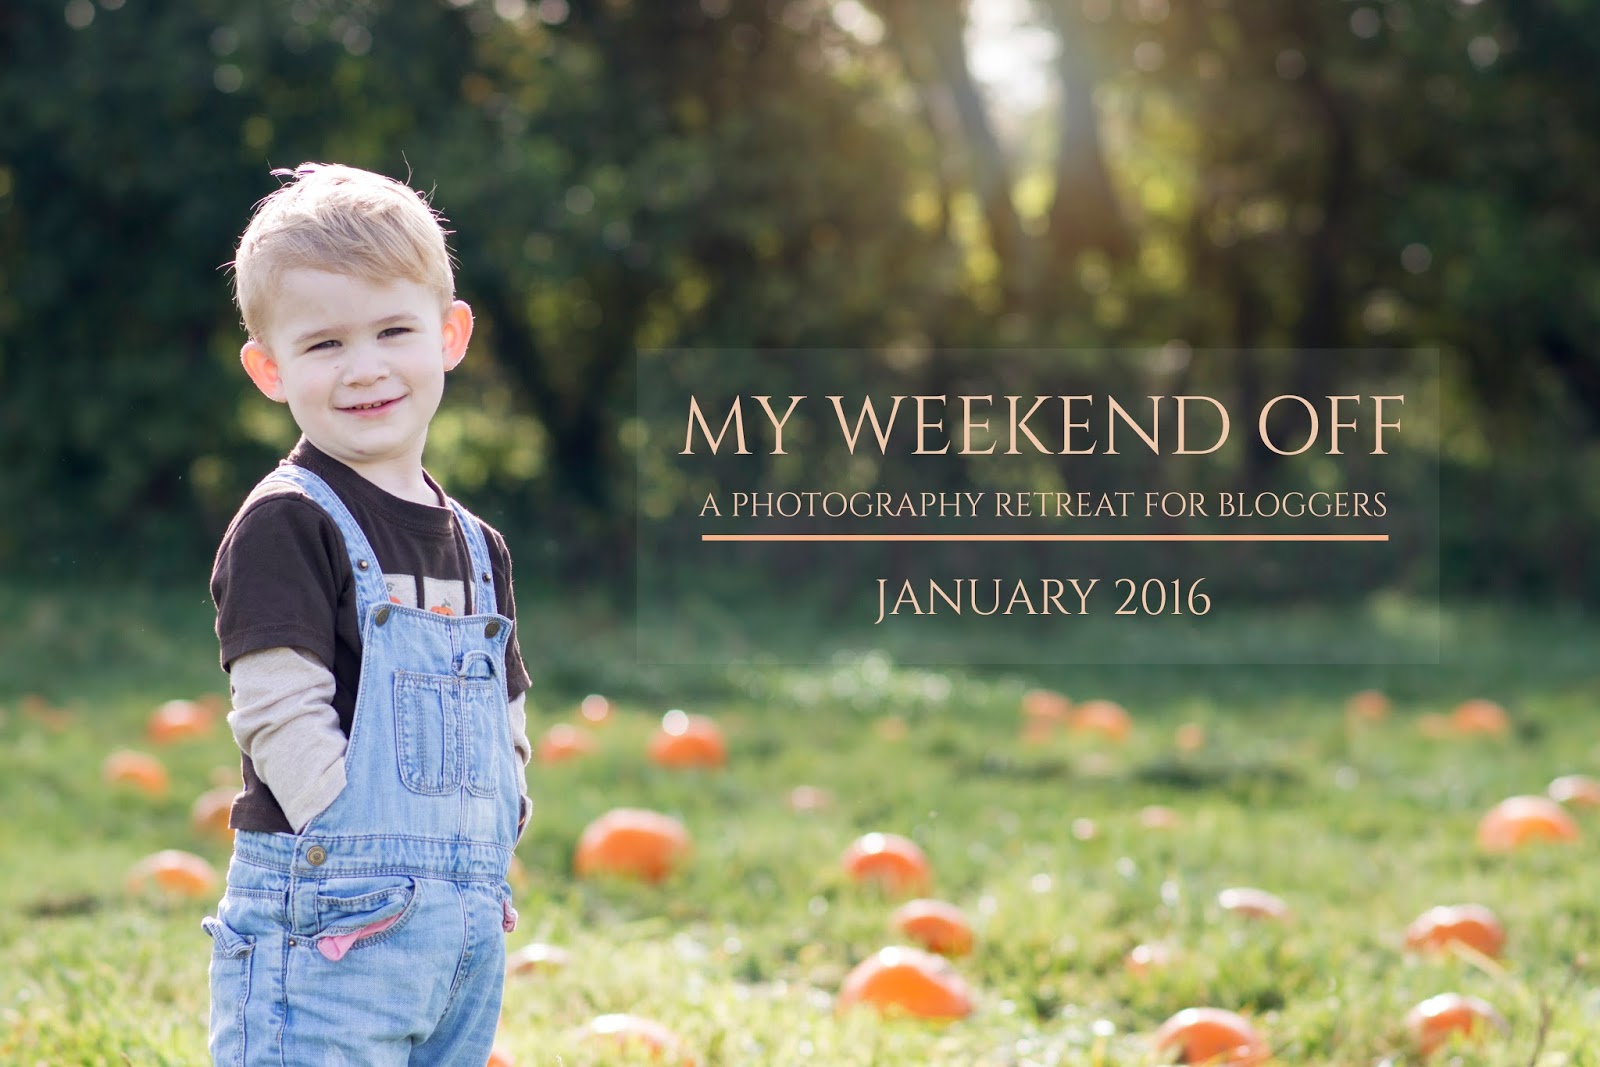 OUR FIRST PHOTOGRAPHY RETREAT – FROM AUTOMATIC TO MANUAL [MY WEEKEND OFF]